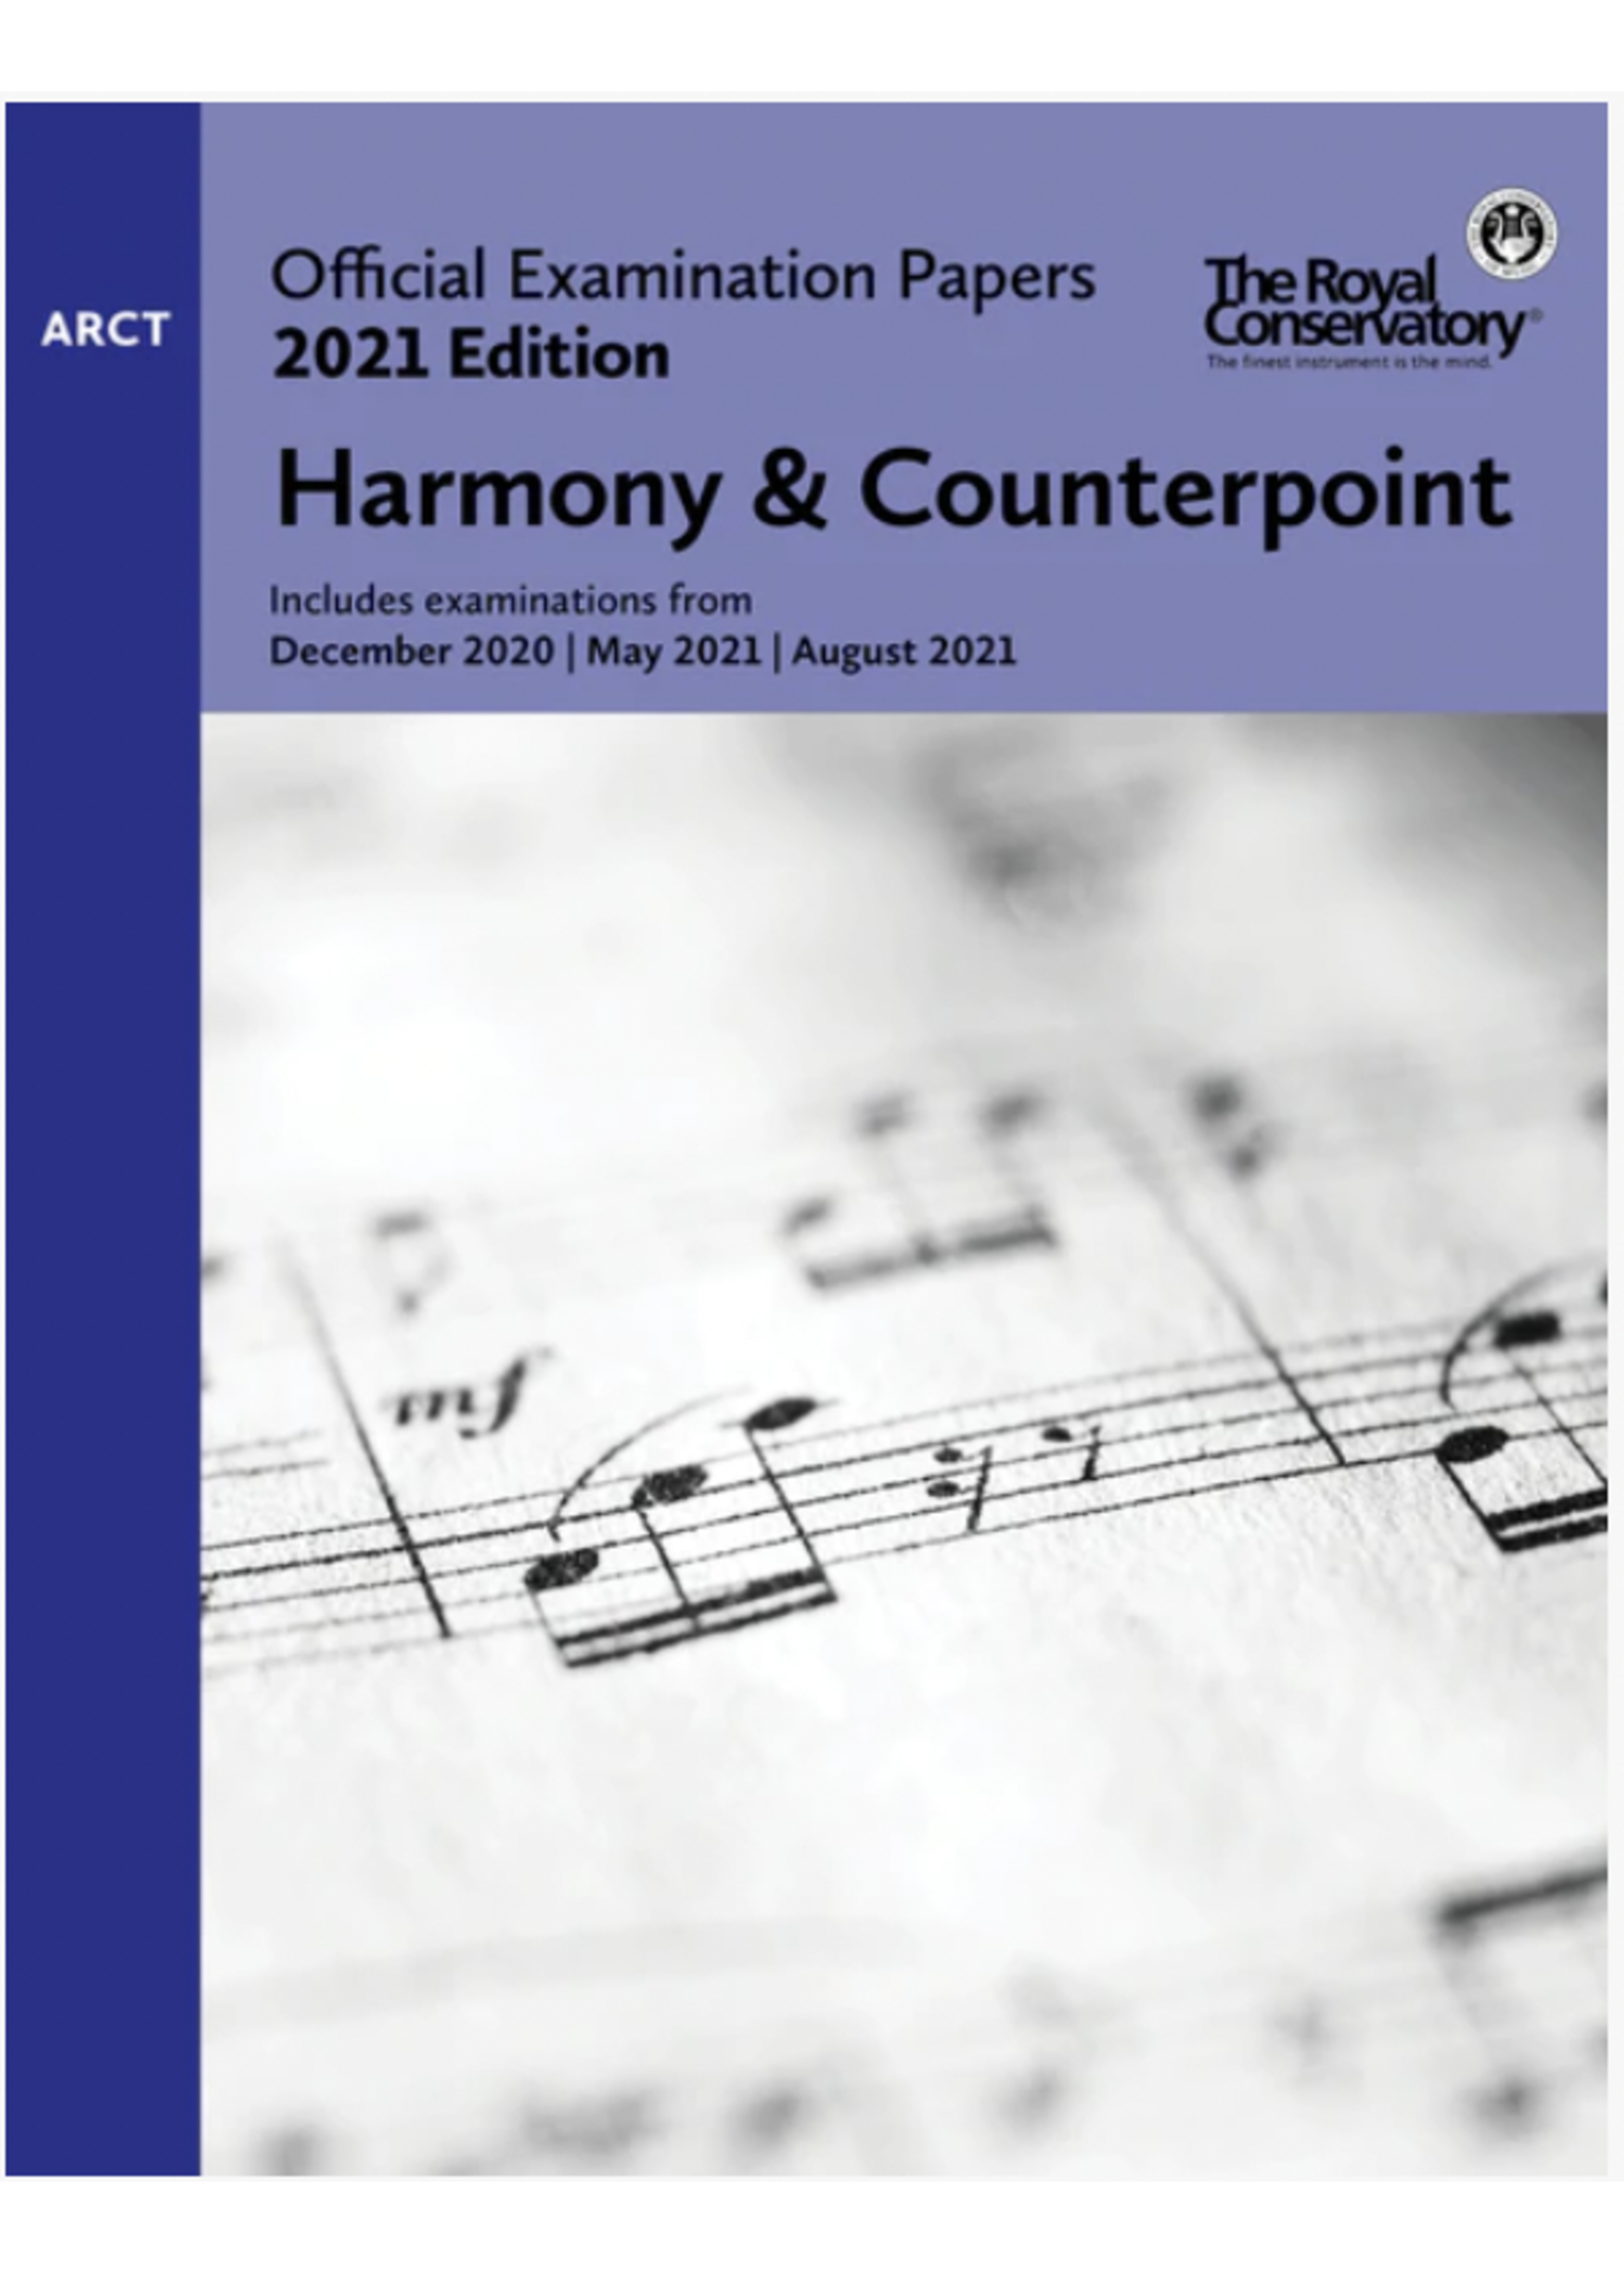 RCM RCM 2021 Official Examination Papers: Harmony & Counterpoint ARCT